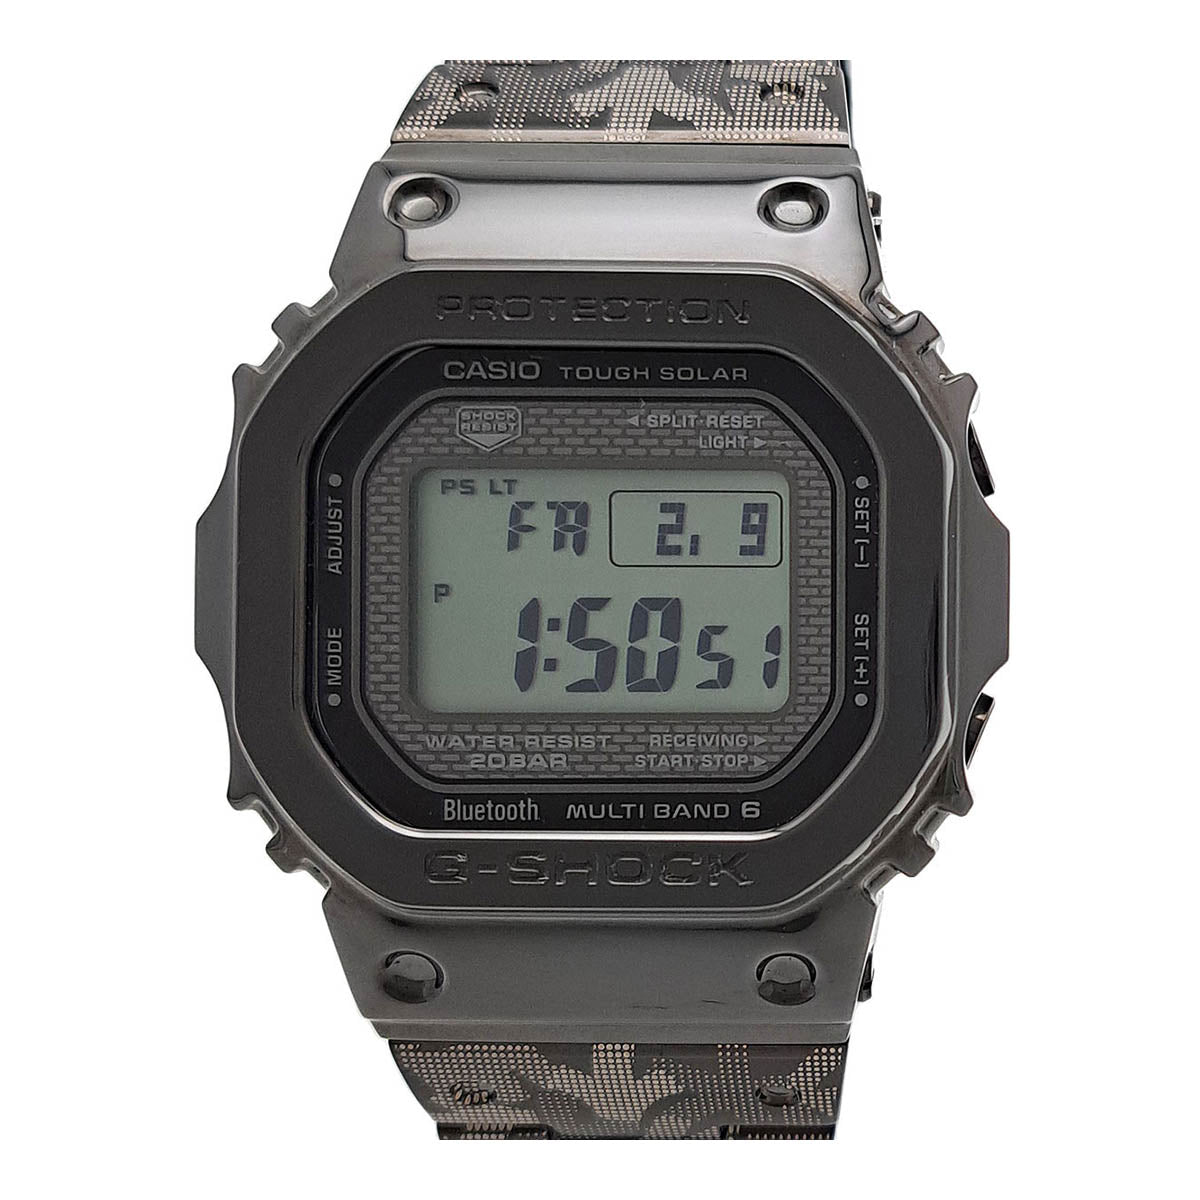 Casio G-Shock "Eric Haze Collaboration 40th Anniversary Limited Model" Men's Solar Wristwatch in Stainless Steel GMW-B5000EH